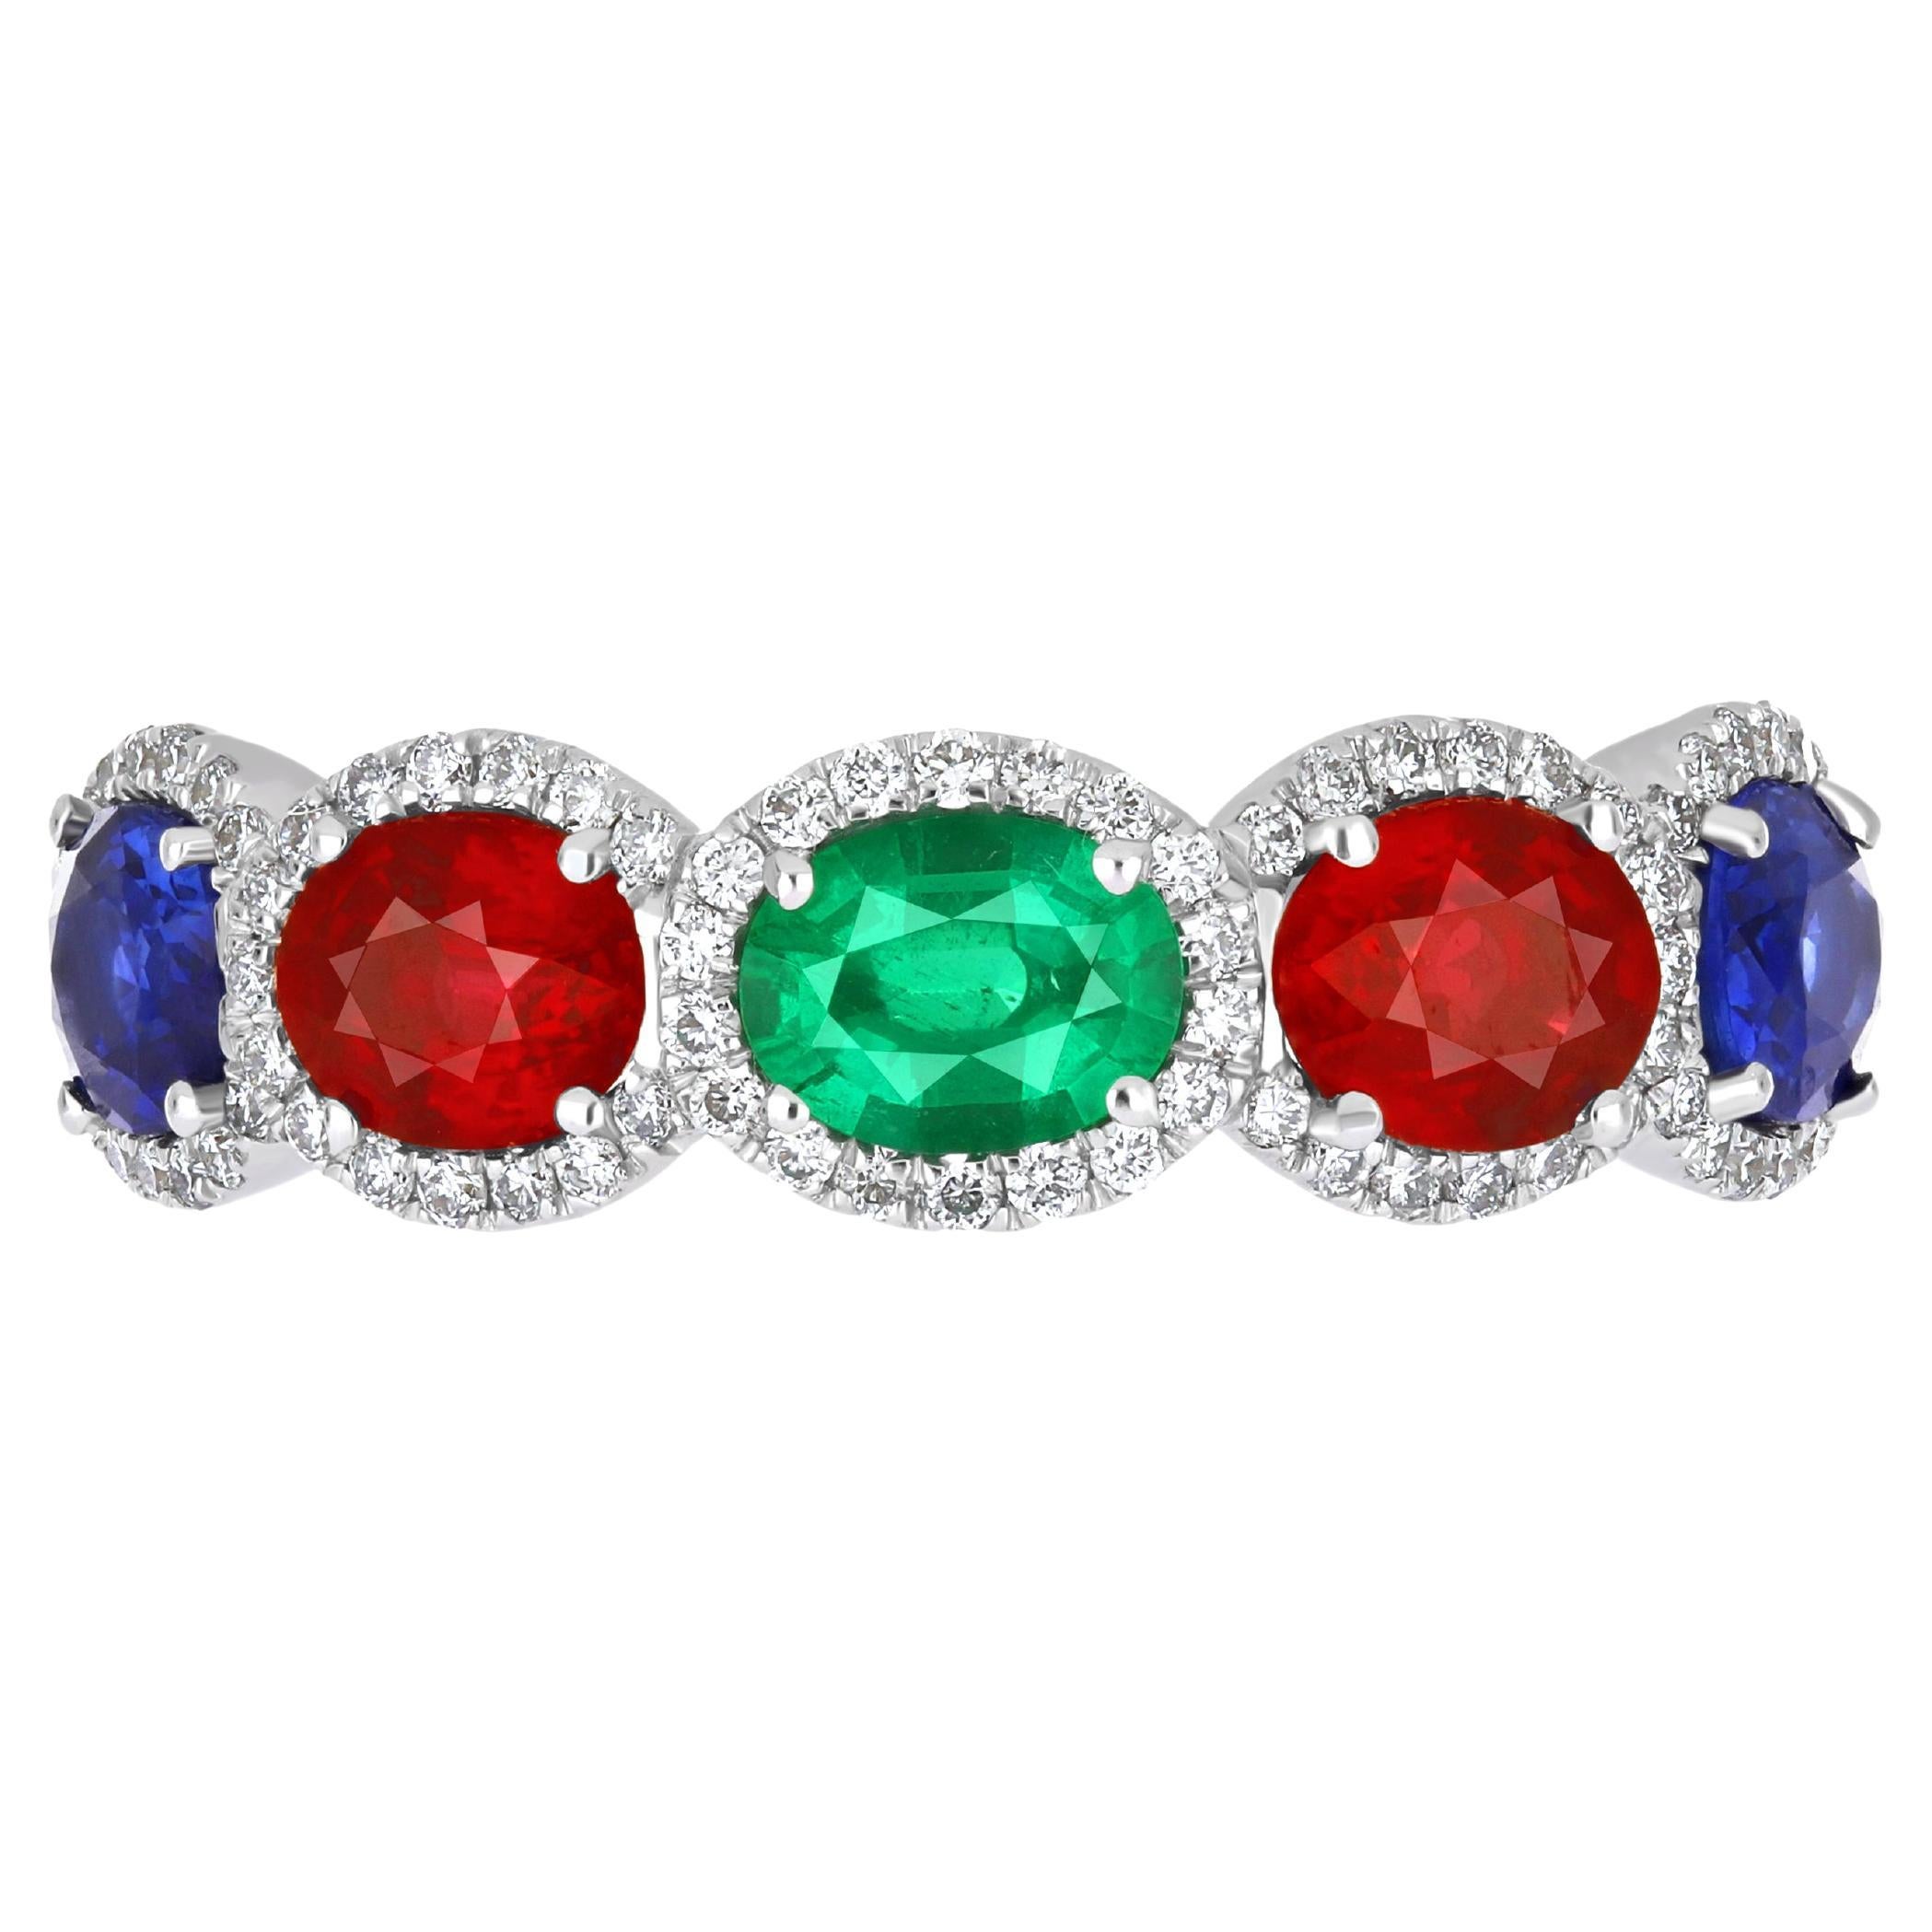 Ruby Mozambique, Blue Sapphire, Emerald and Diamond Ring 18 Karat White Gold